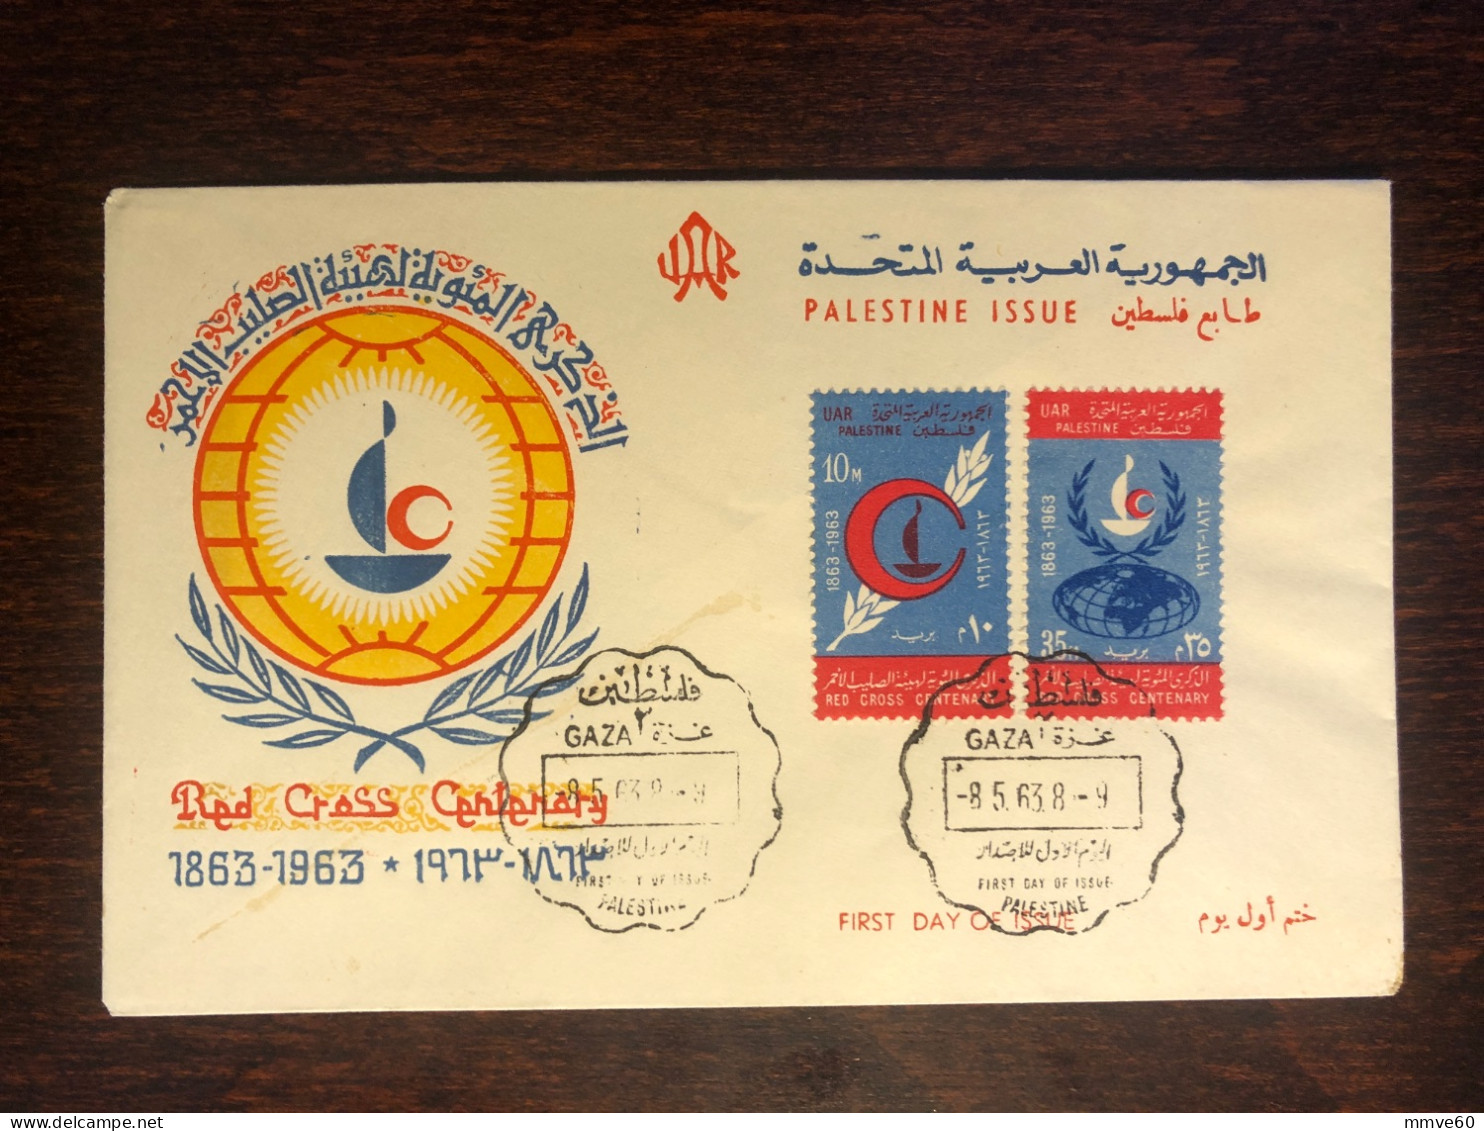 EGYPT UAR PALESTINE GAZA FDC COVER 1963 YEAR  RED CROSS HEALTH MEDICINE STAMPS - Lettres & Documents